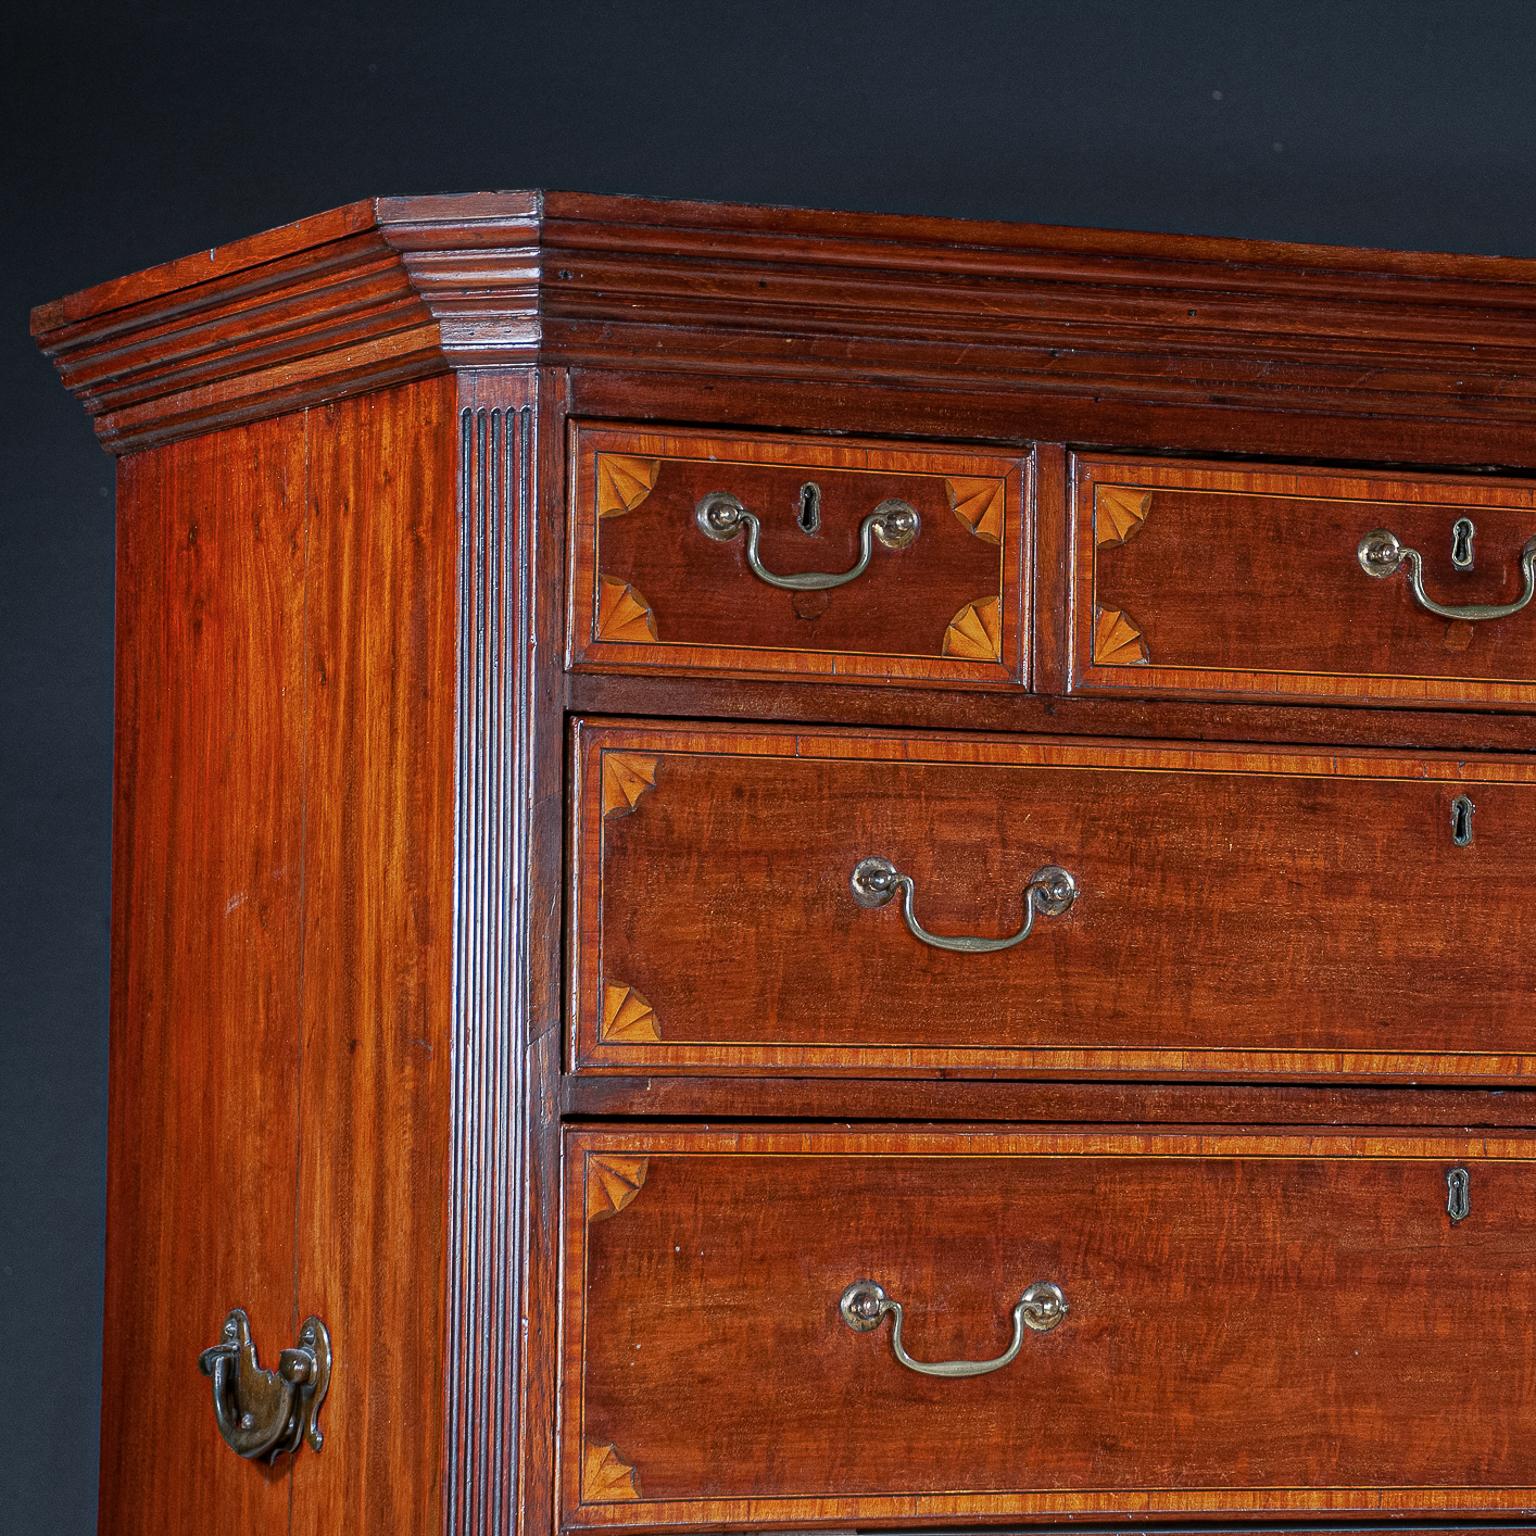 English inlaid chest on chest w/secretary drawer
A Sheraton mahogany chest on chest with secretary fitted drawer (notice the brass drop-down support). This is one of the better ones we've had in some time. Impressive in appearance with striking